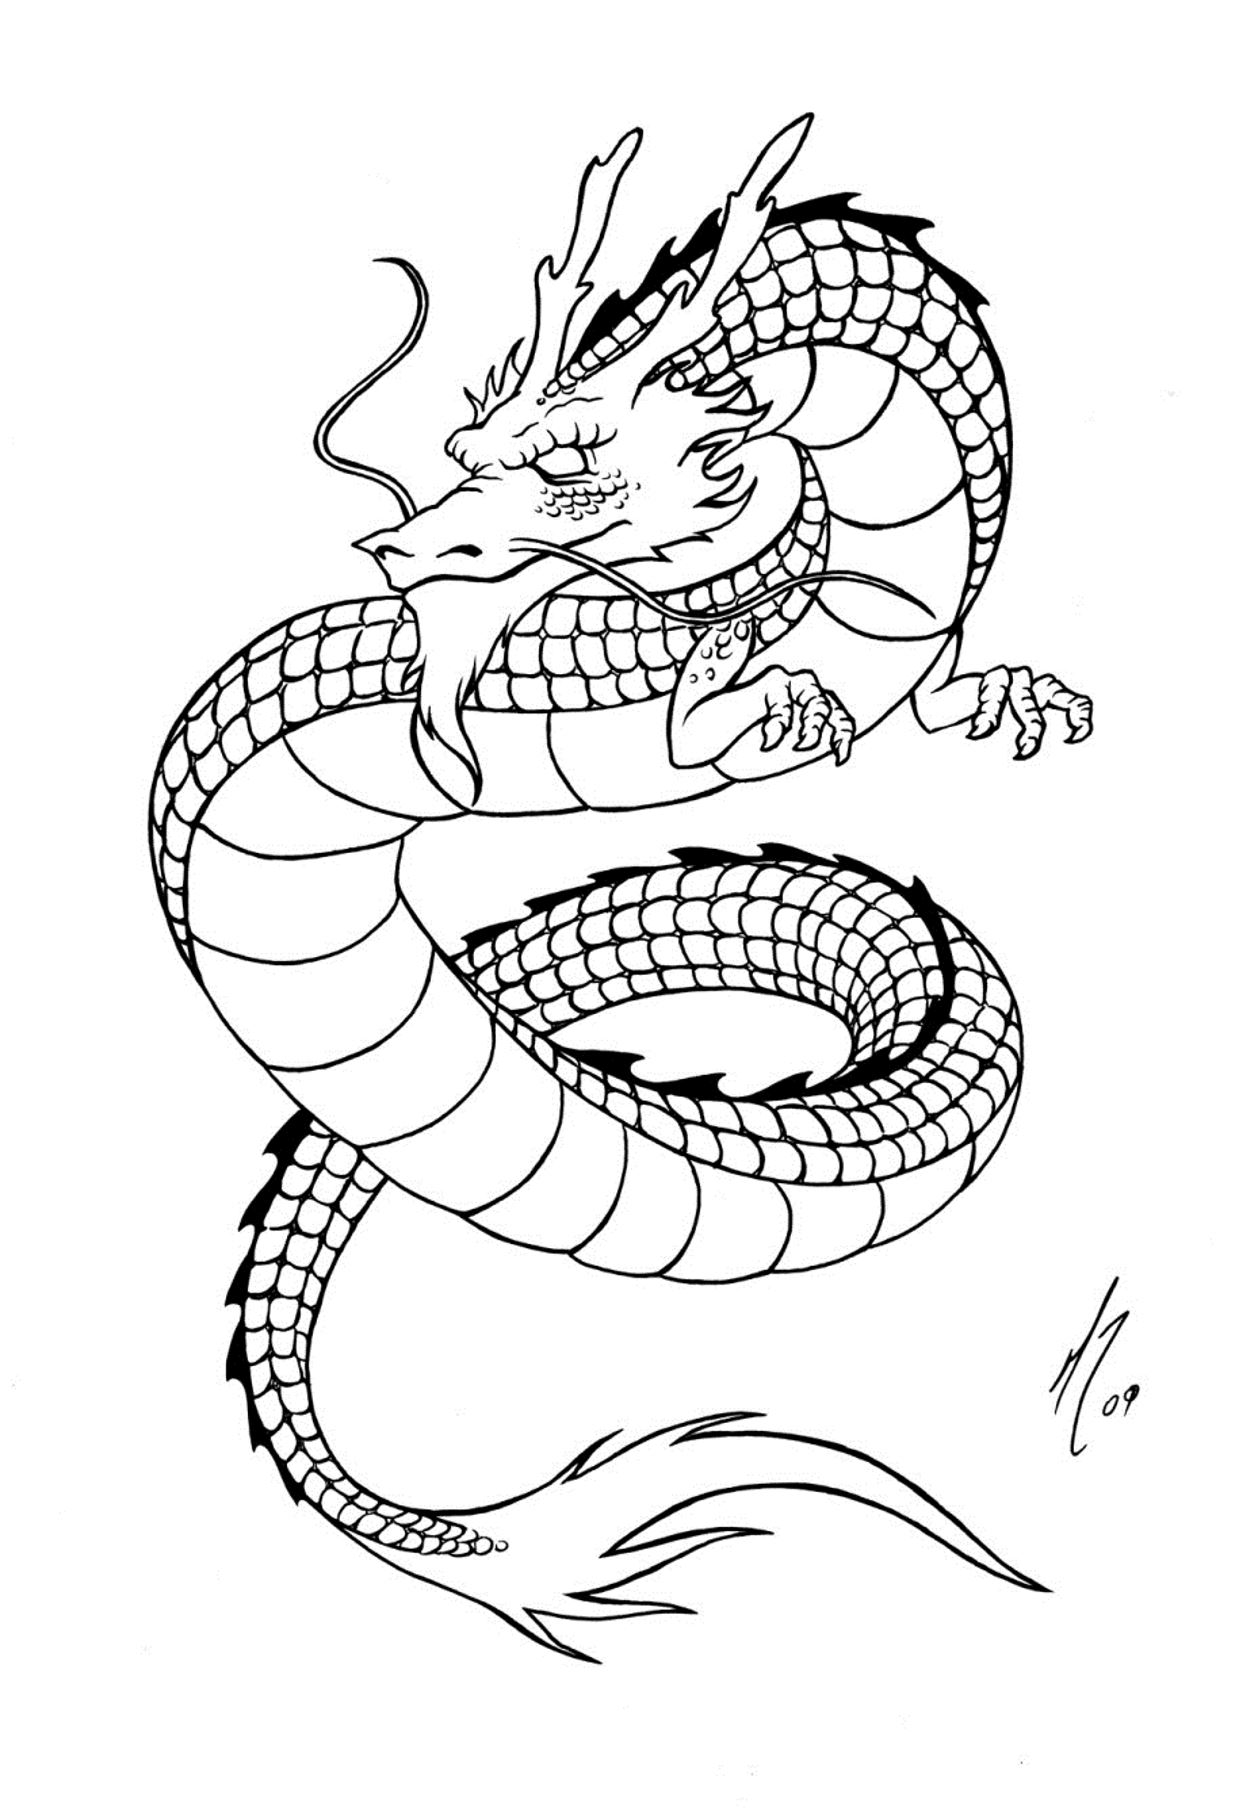 Tattoo chinese dragon - Tattoos Adult Coloring Pages